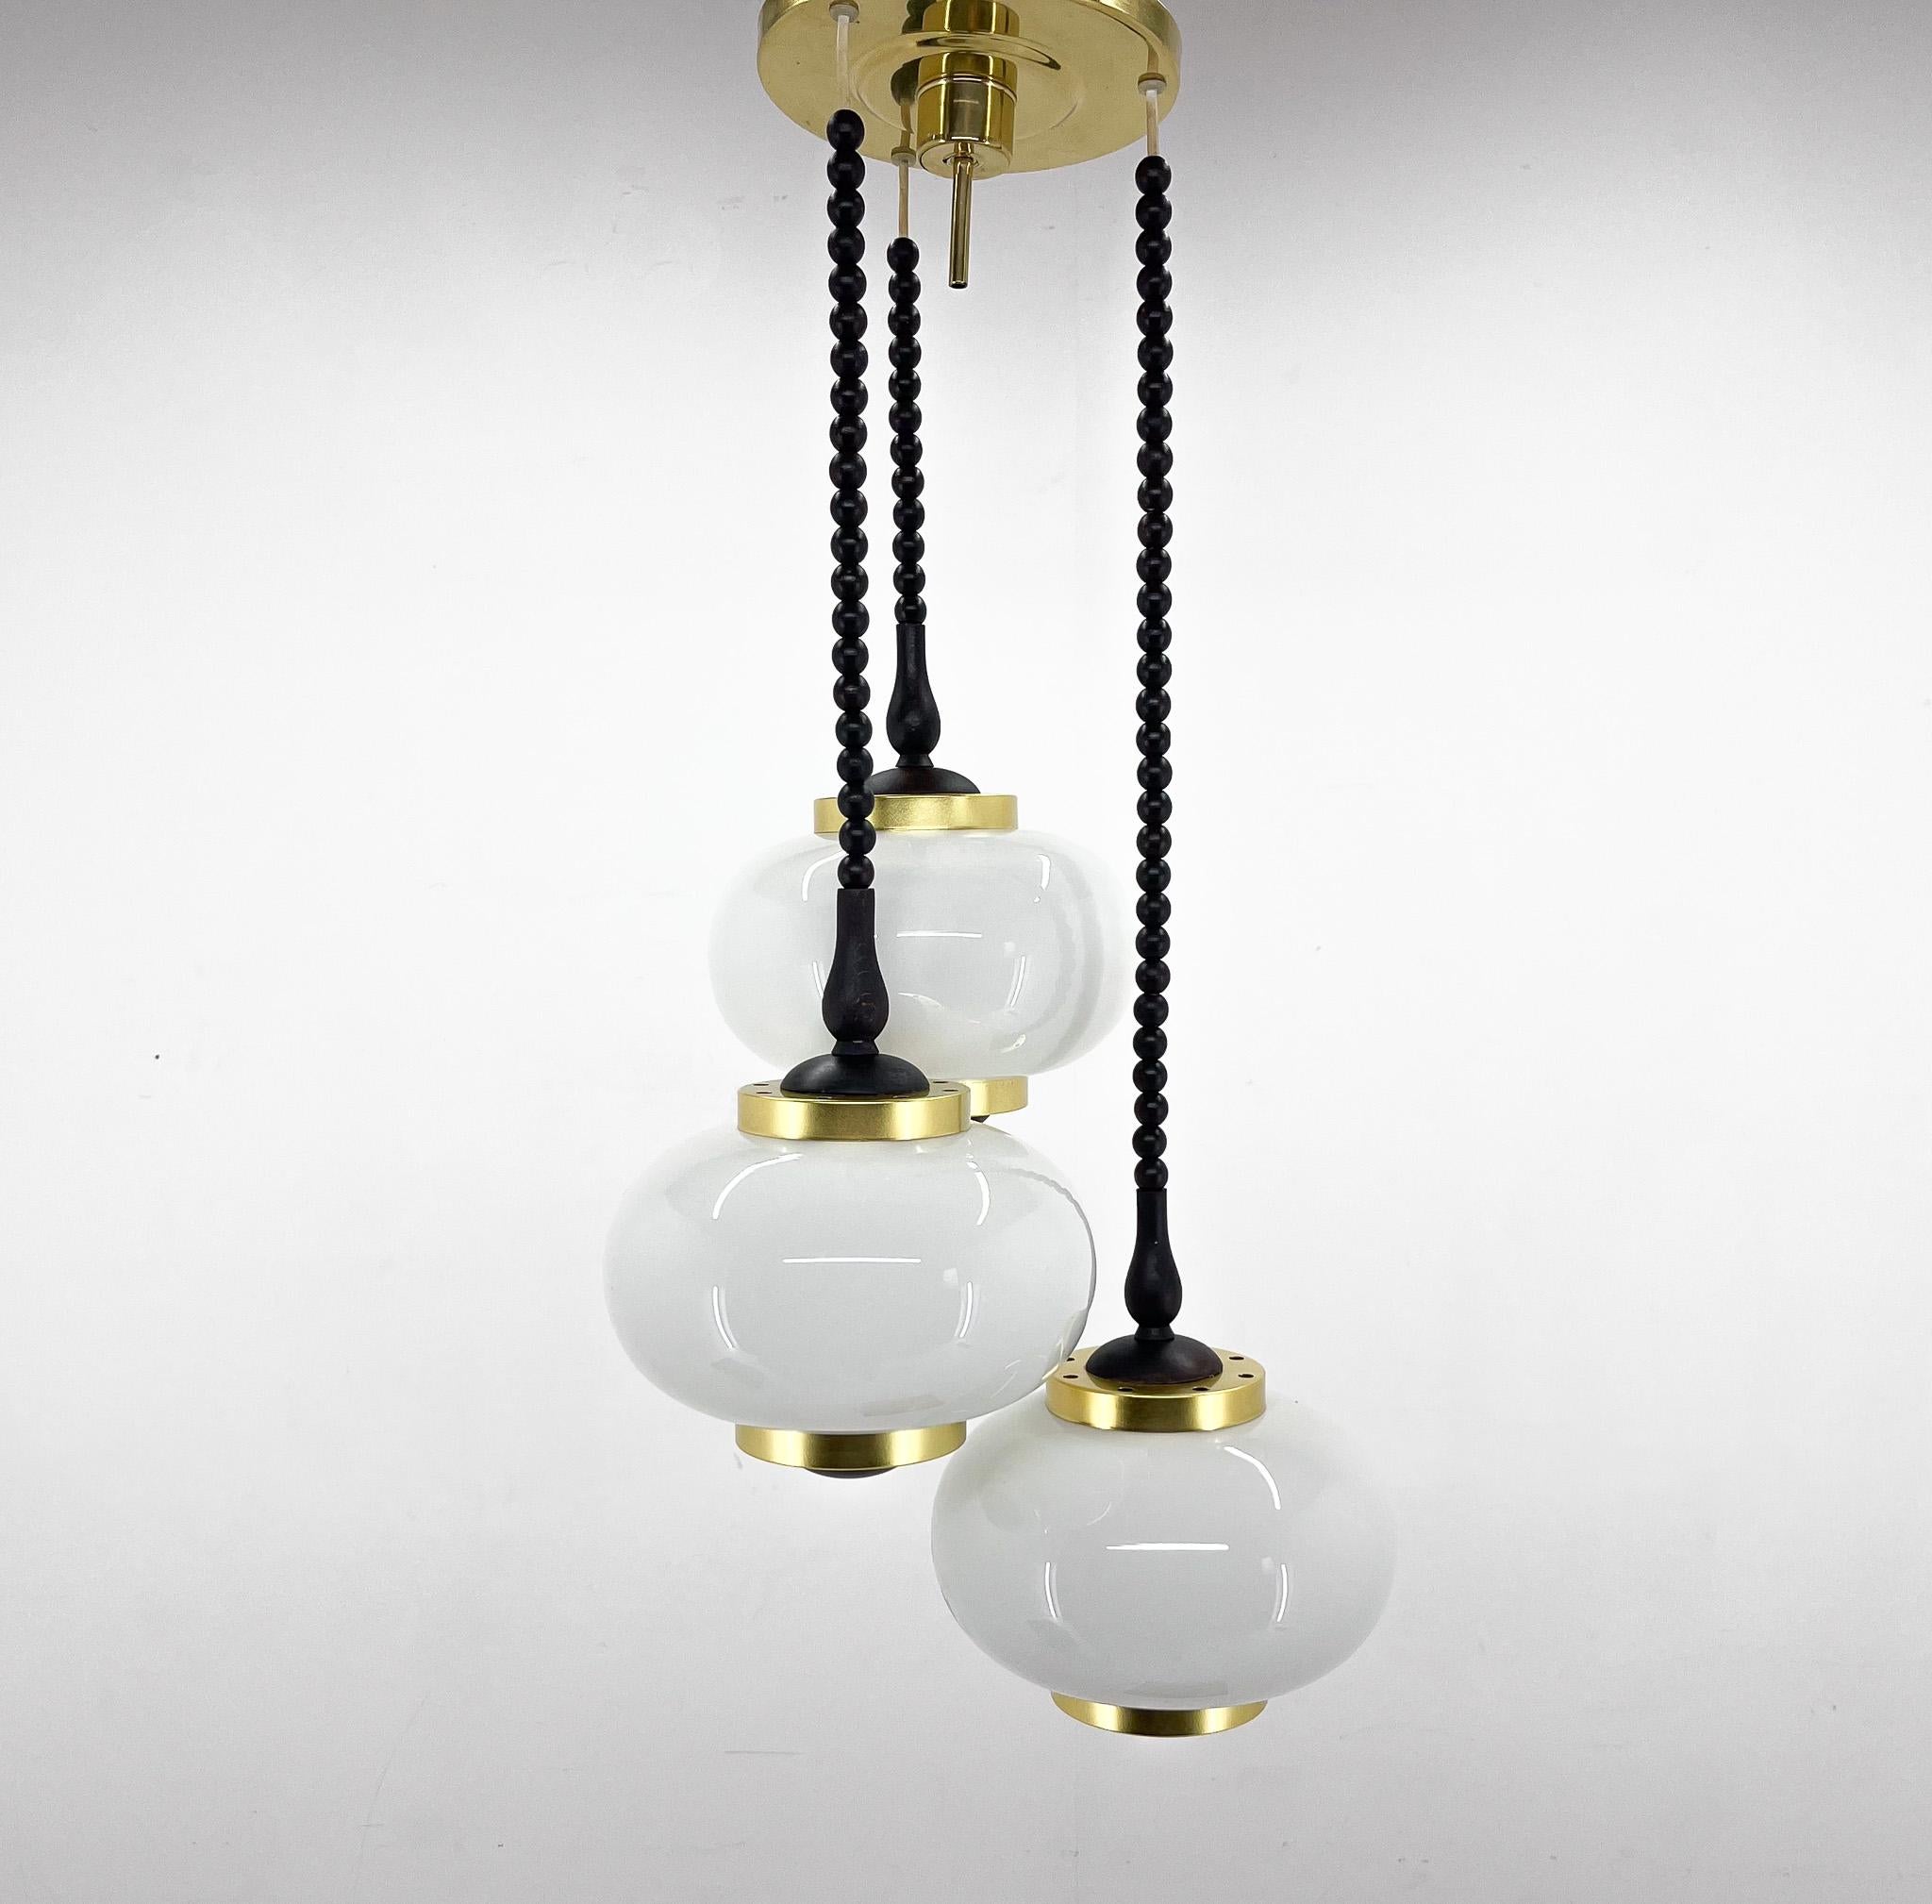 Vintage chandelier made in Poland in the 1970's by Polam Bielsko. Made of brass, metal, wood and milk glass.